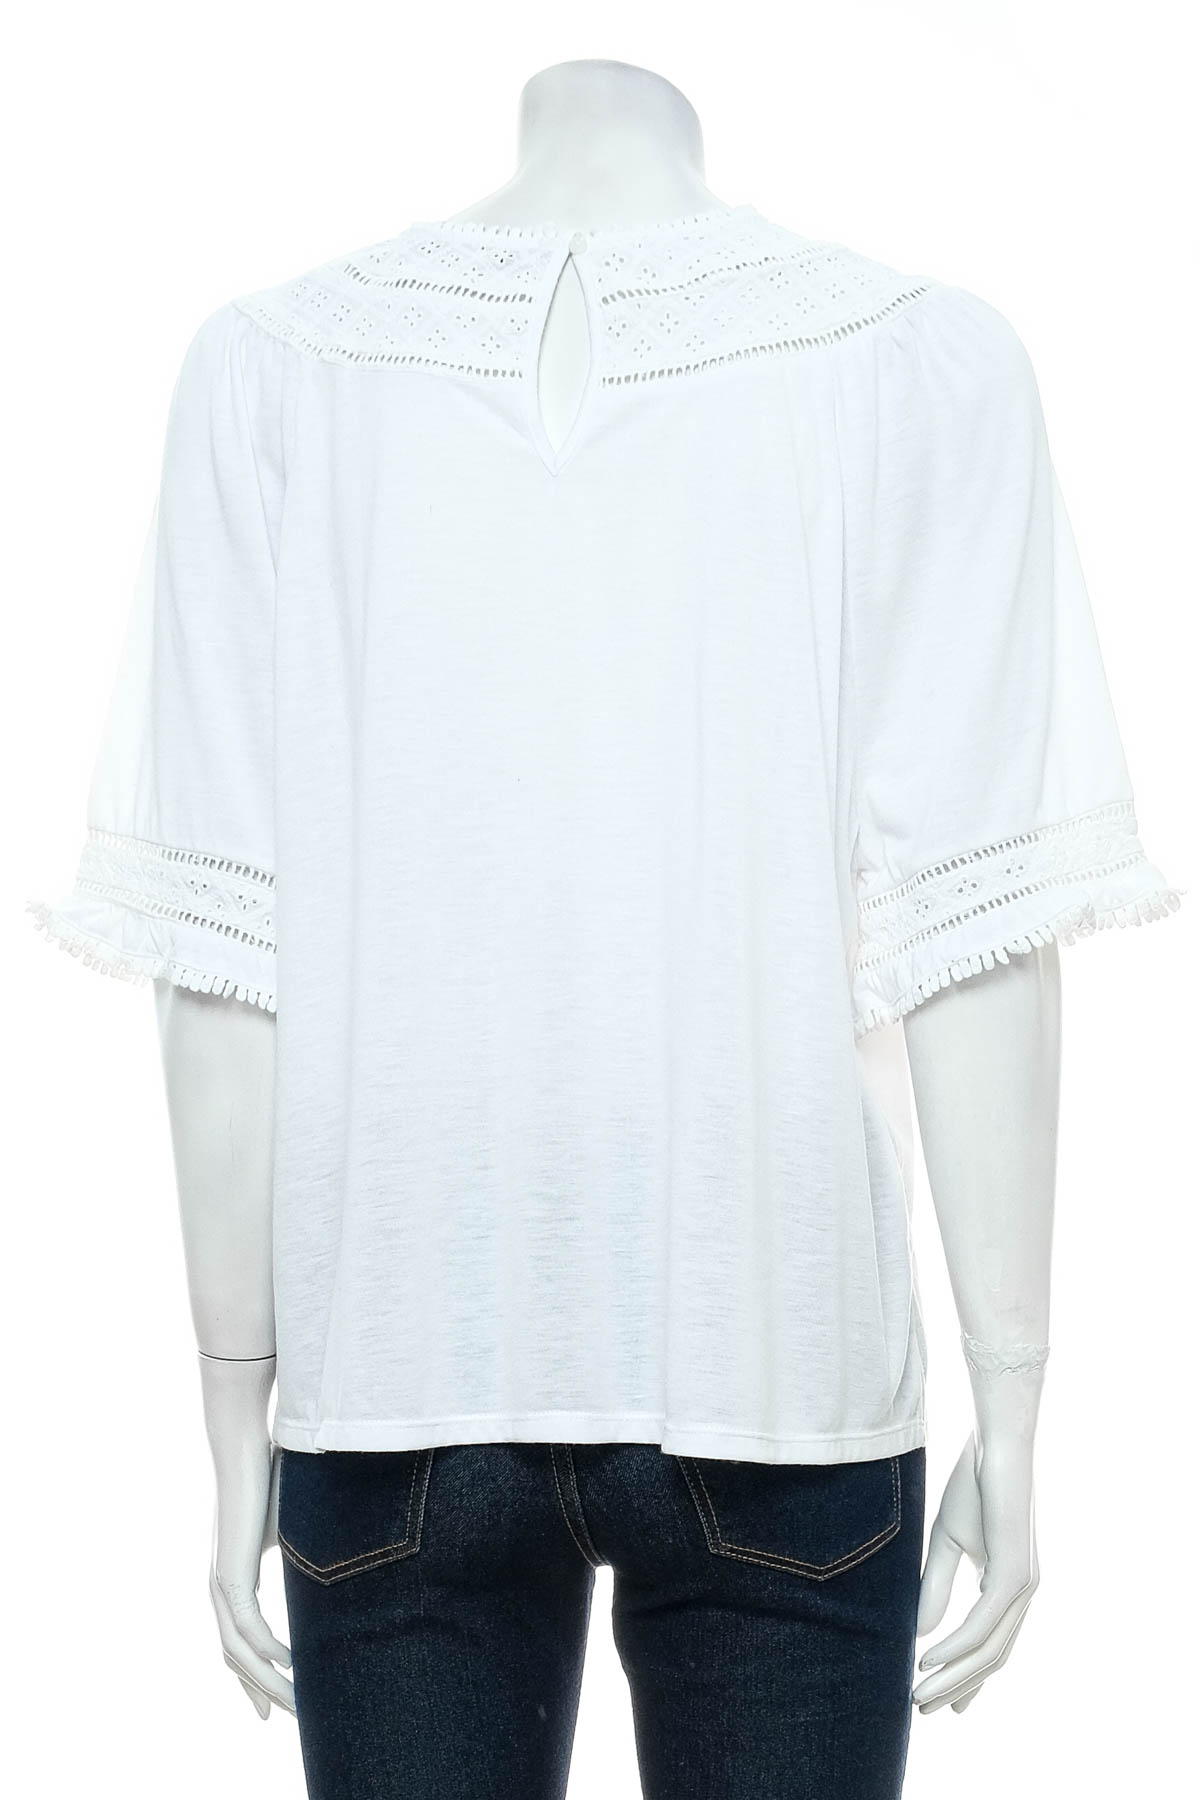 Women's t-shirt - M&S COLLECTION - 1